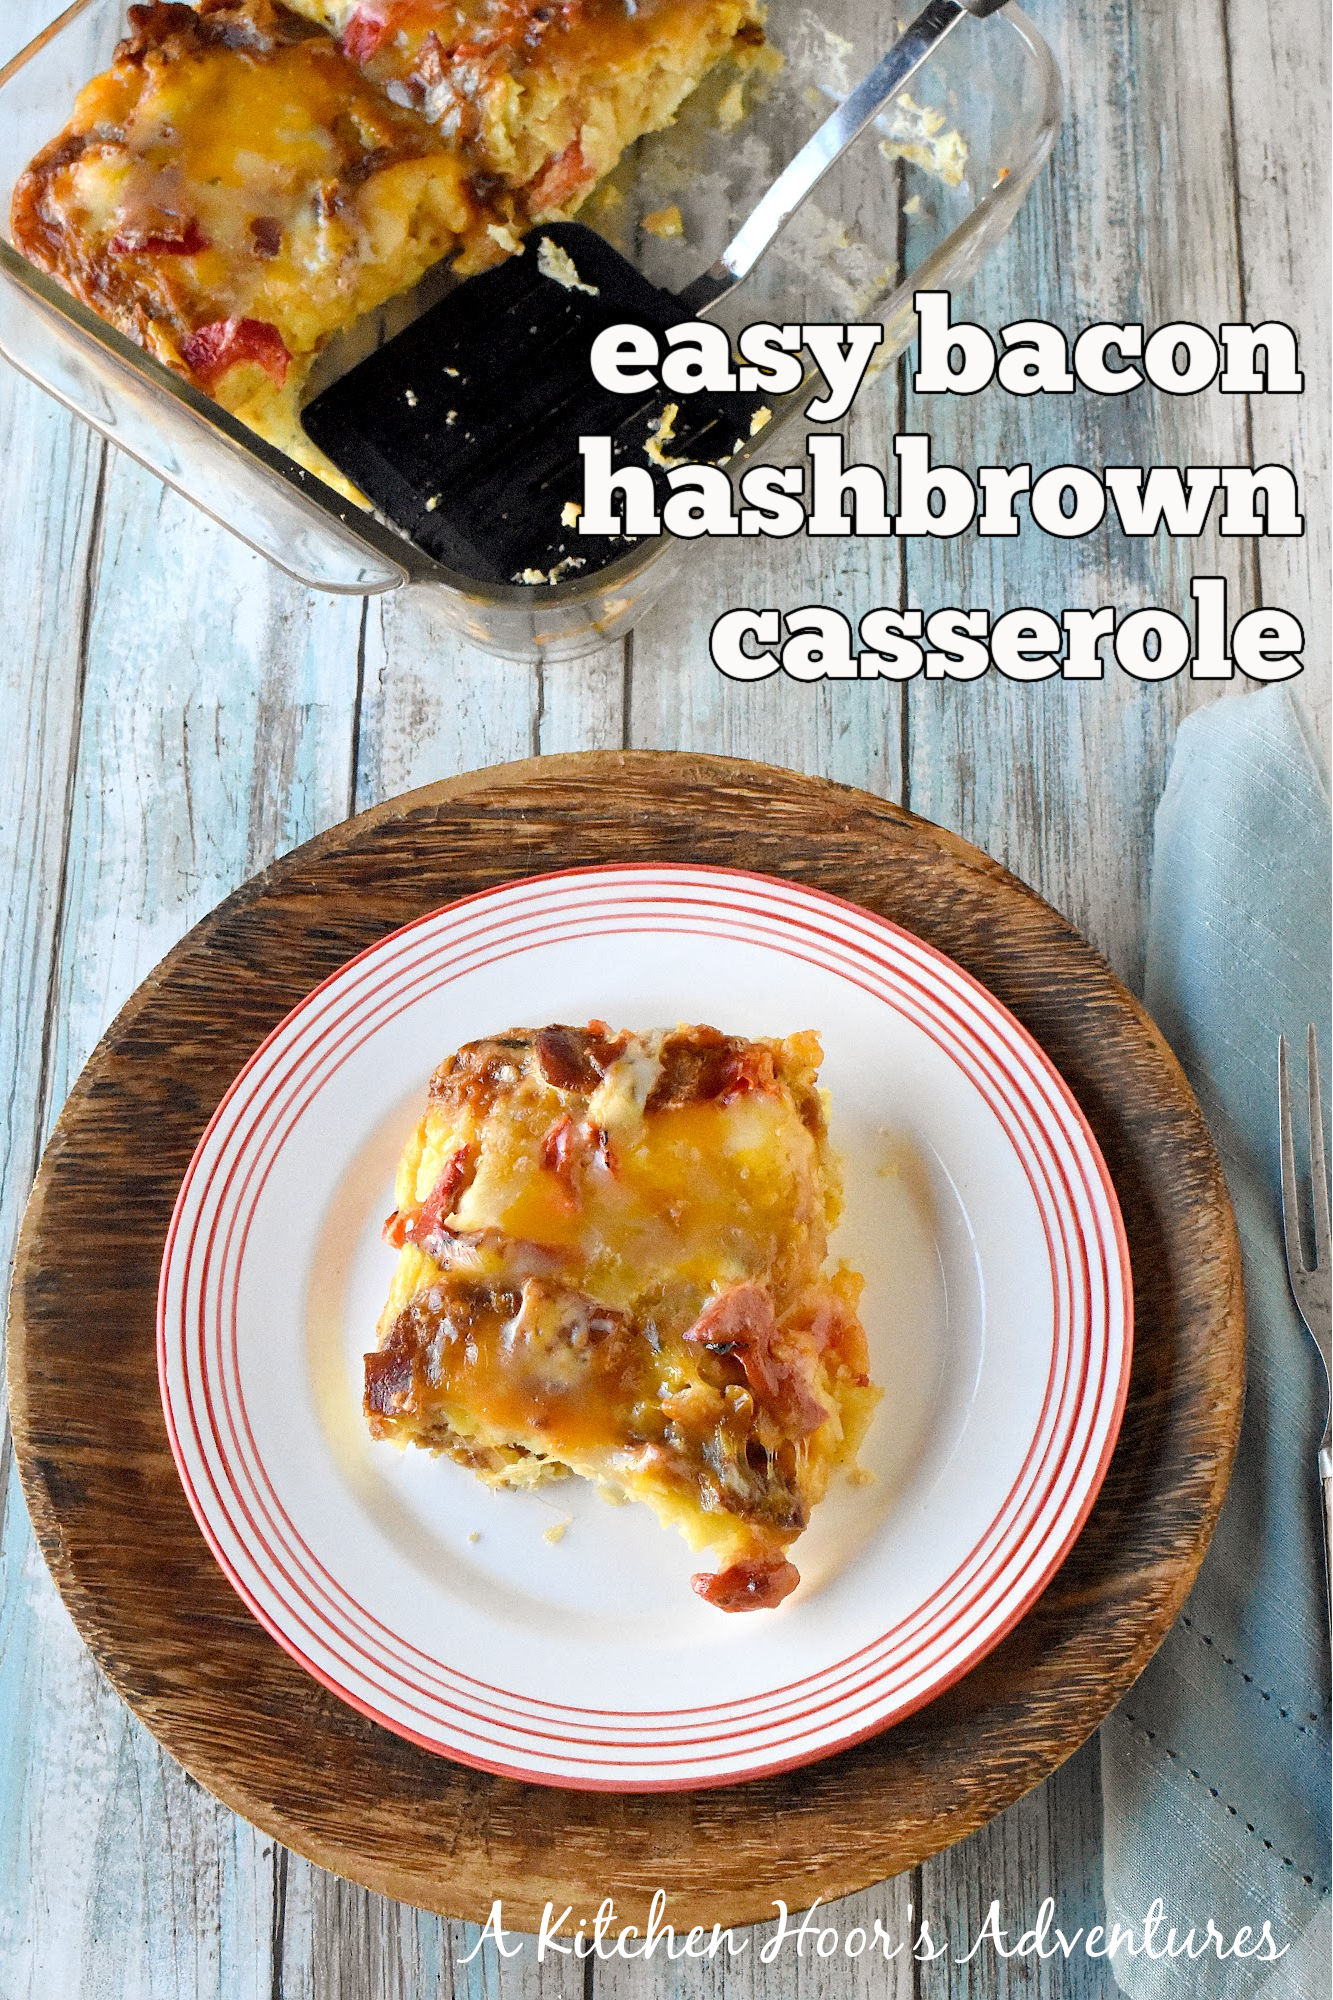 Turn your brunch game up a notch with this Easy Bacon Hashbrown Casserole. Trust us, your taste buds will thank you.  #BaconLoversDelight #BreakfastCasseroleGoals #EasyBreakfastRecipes #HashbrownHeaven #ComfortFoodCravings
